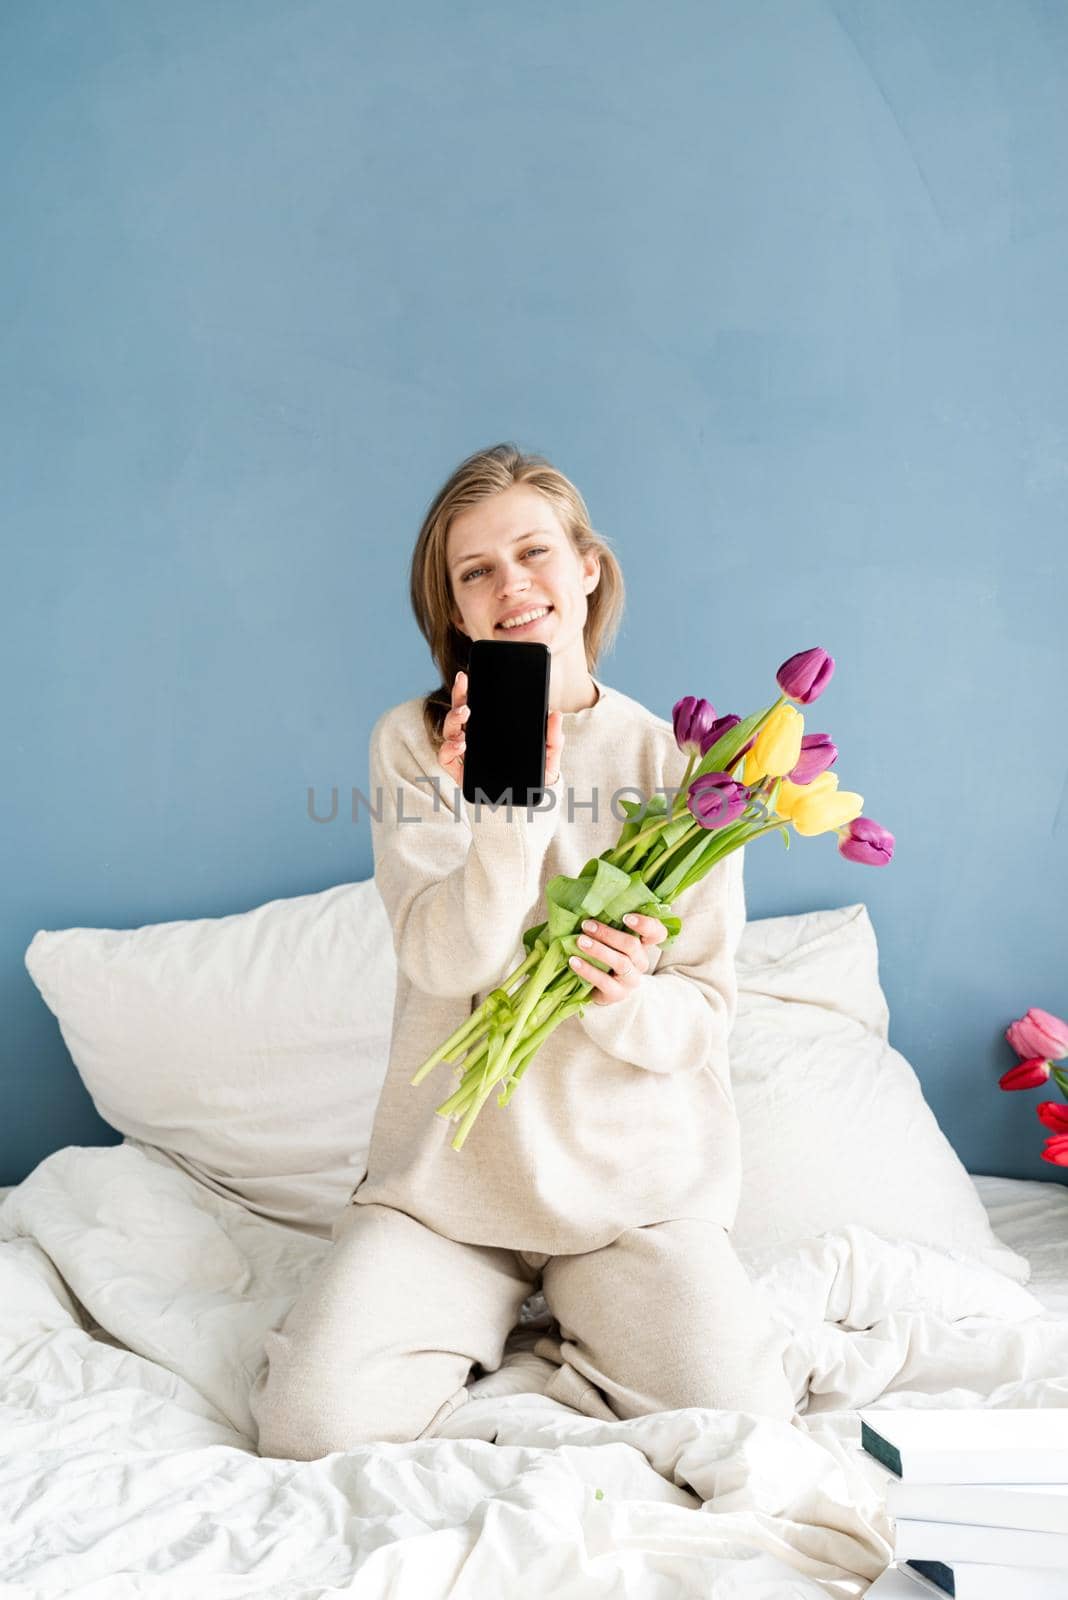 Happy woman sitting on the bed wearing pajamas holding tulip flowers and showing smartphone screen, mock up by Desperada